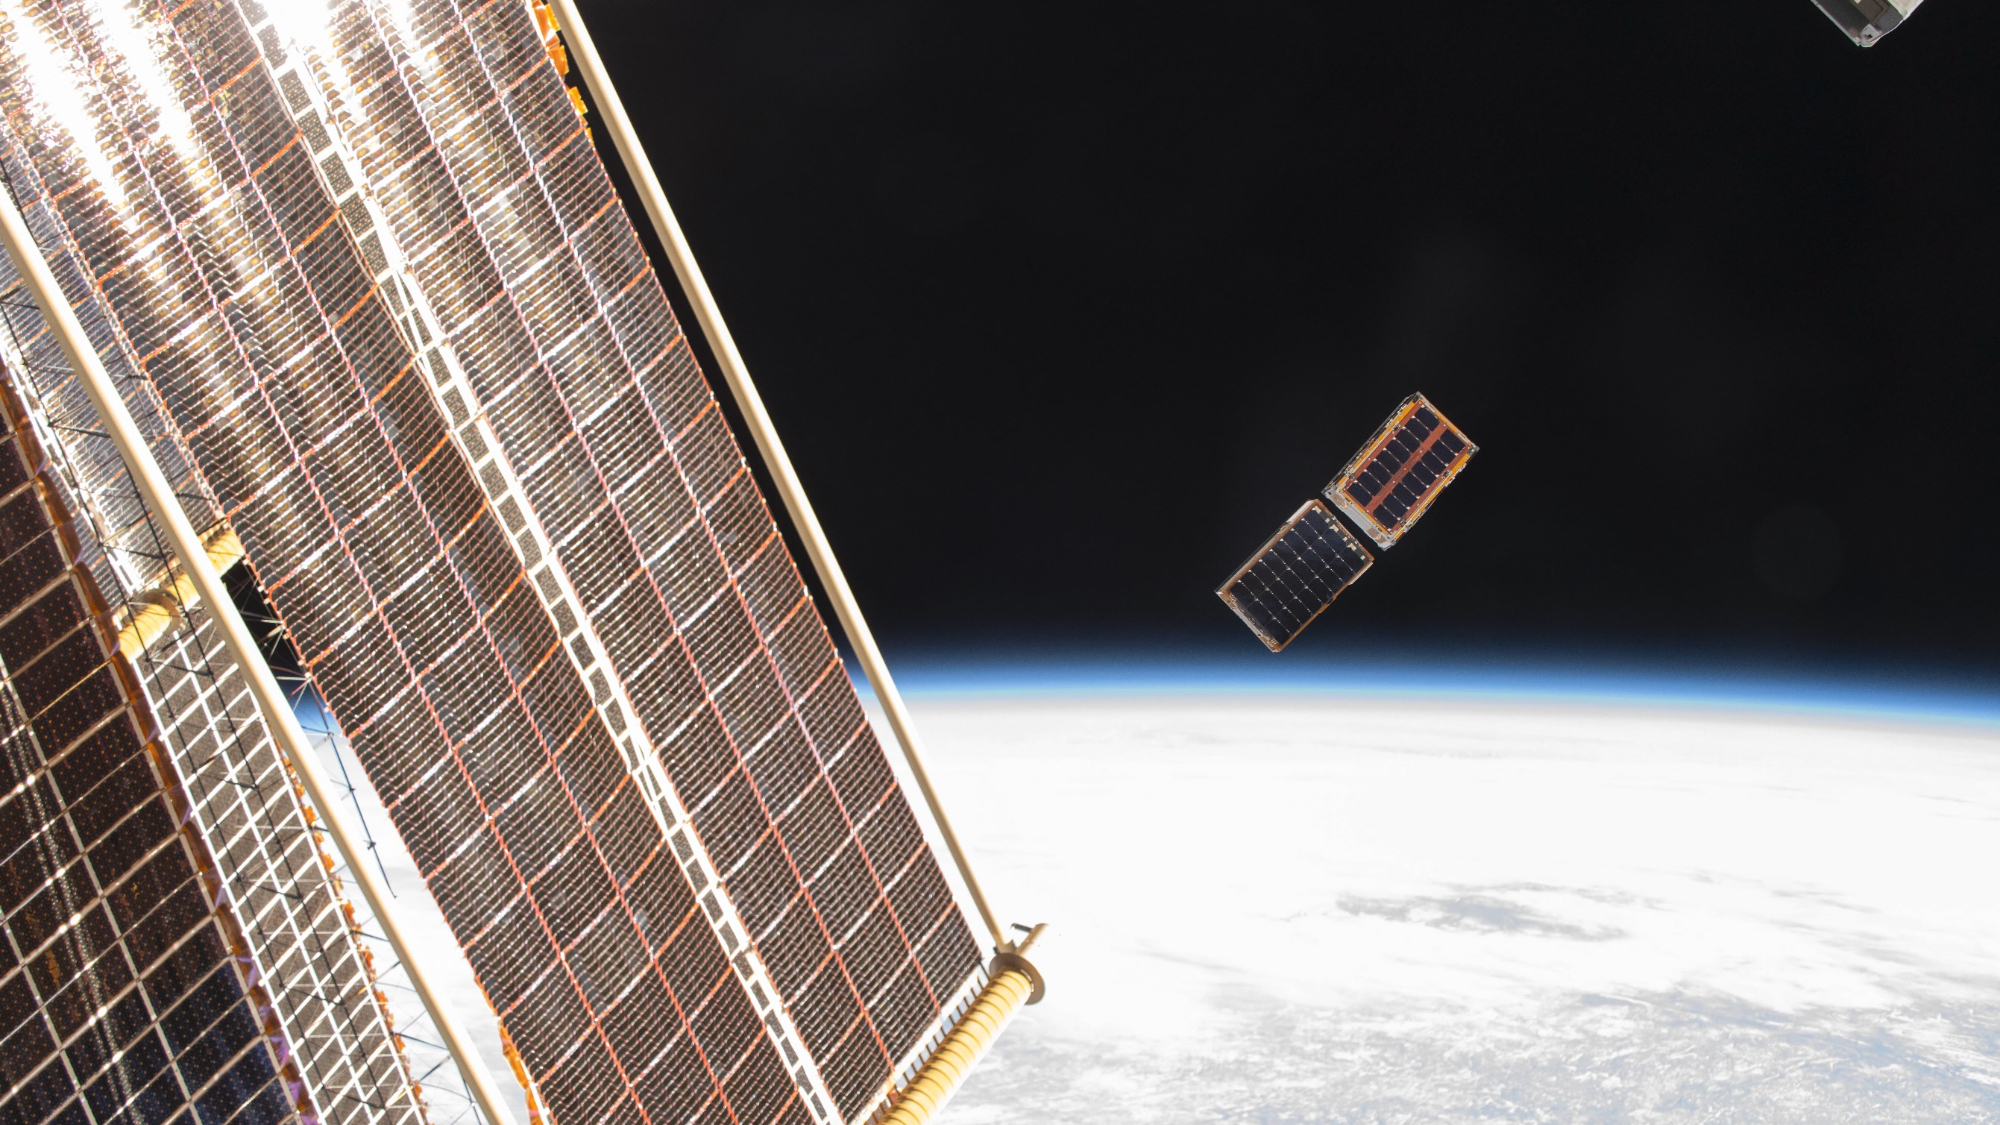 Watch 2 tiny satellites deploy from the ISS in dazzling time-lapse video Space